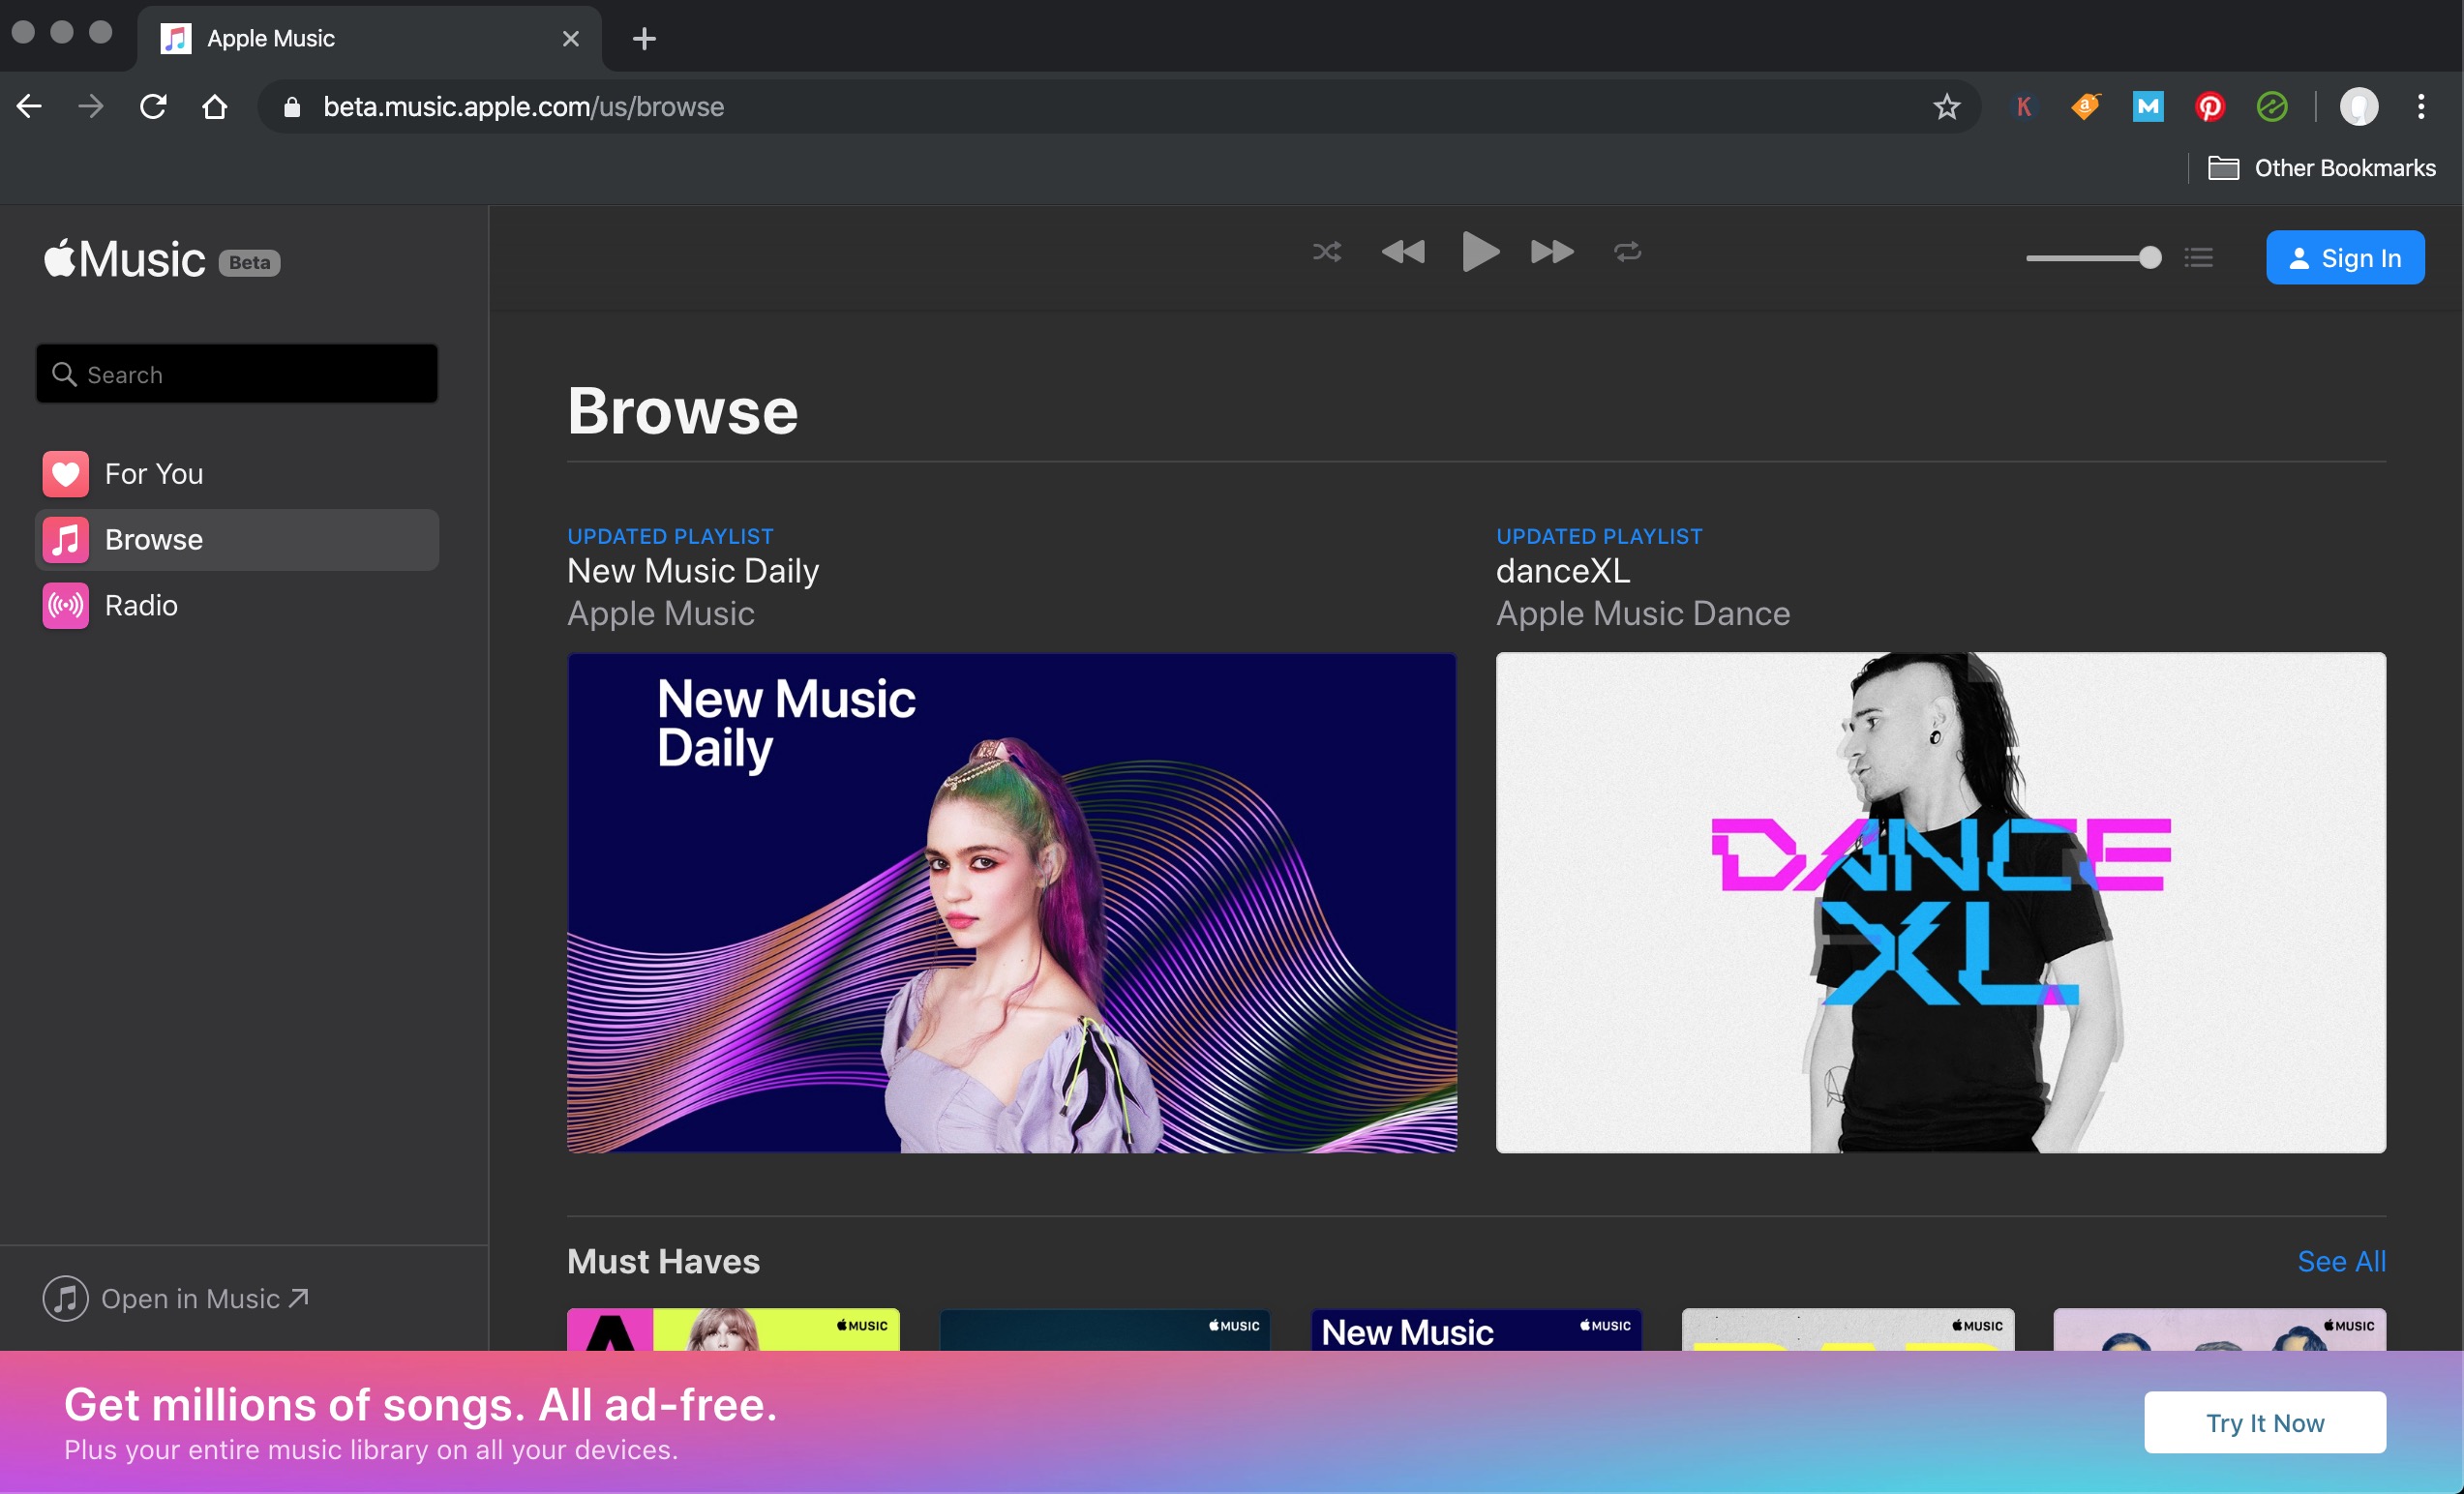 Apple Music Is Now On The Web!